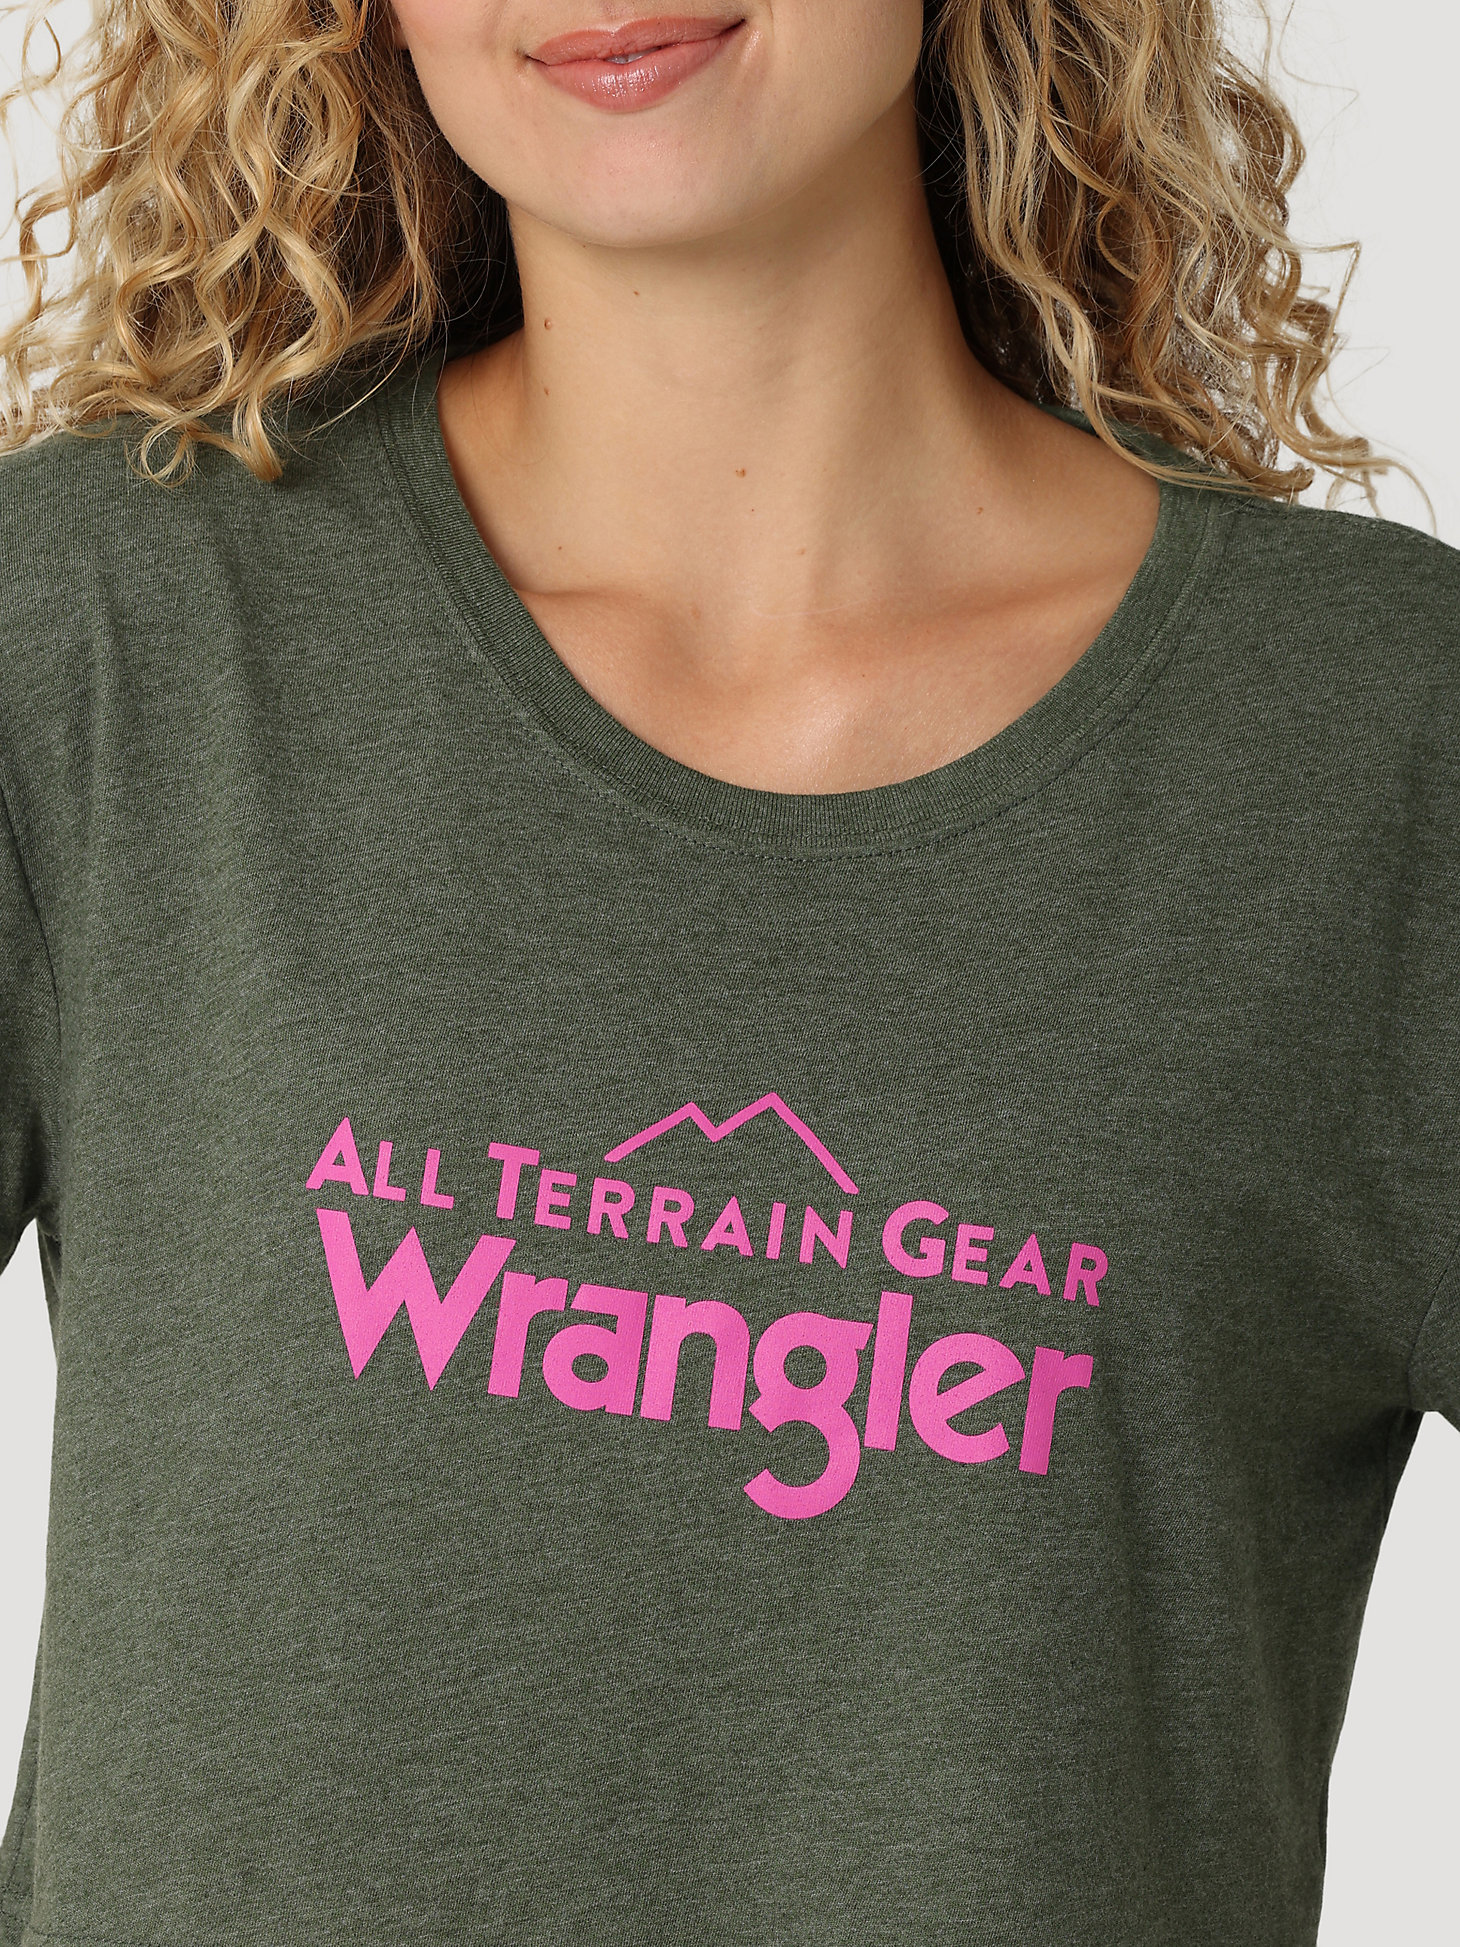 ATG By Wrangler™ Women's Logo Graphic Crop Tee in Black Forest Heather alternative view 1